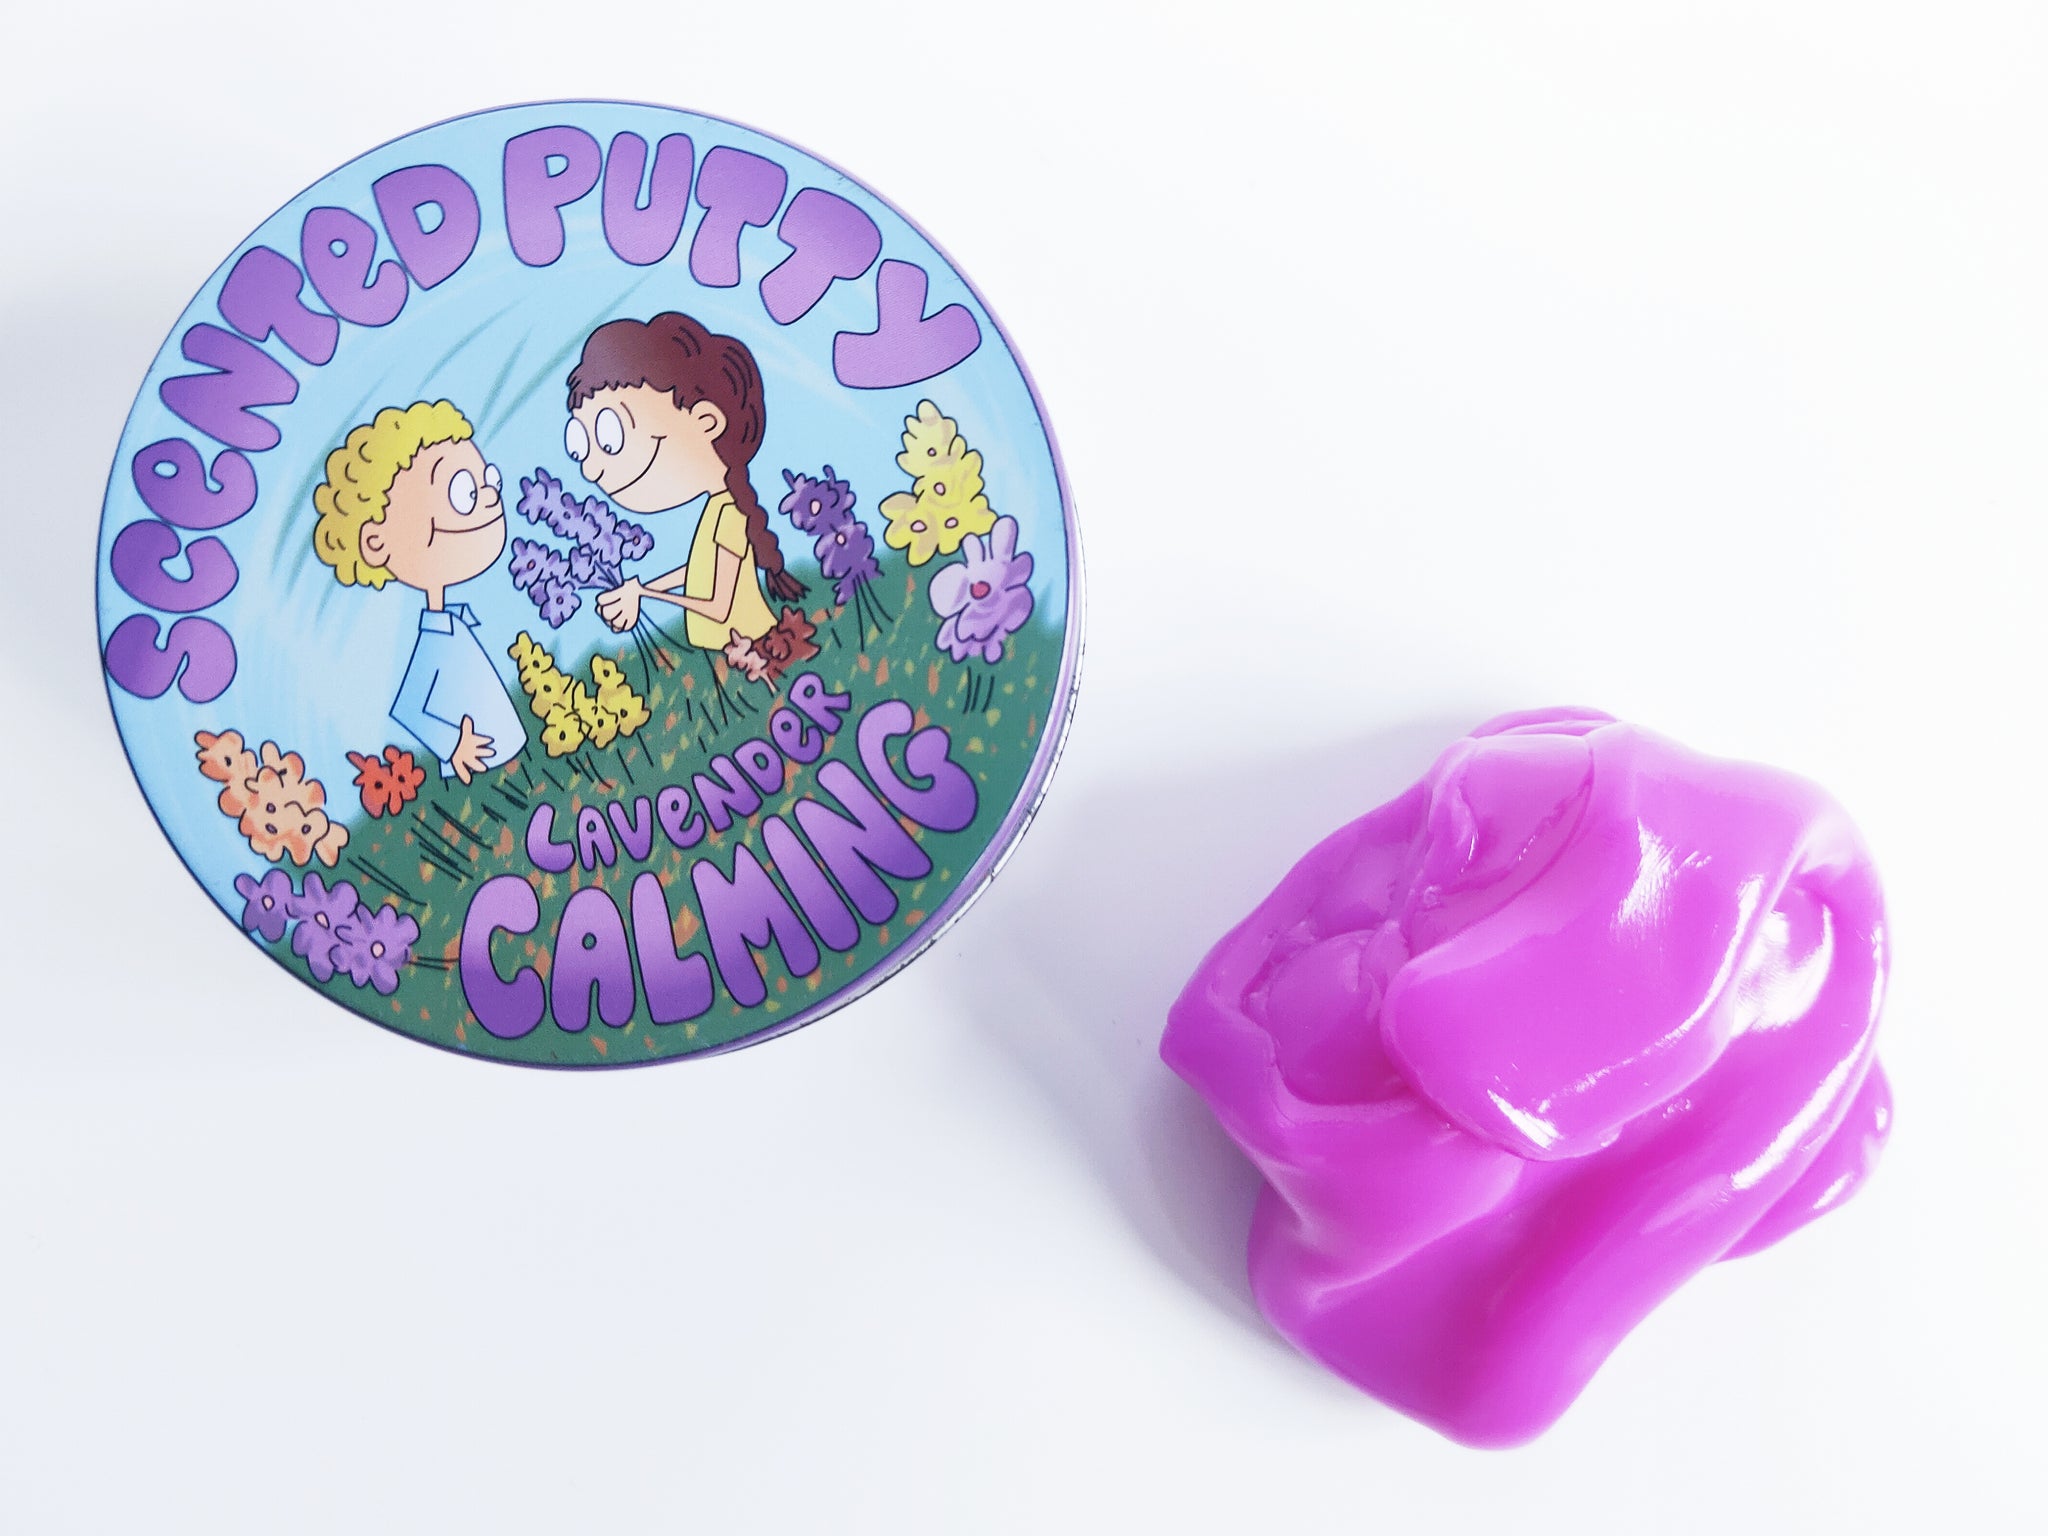 Scented Putty - Calming ("Firm", Lavender)